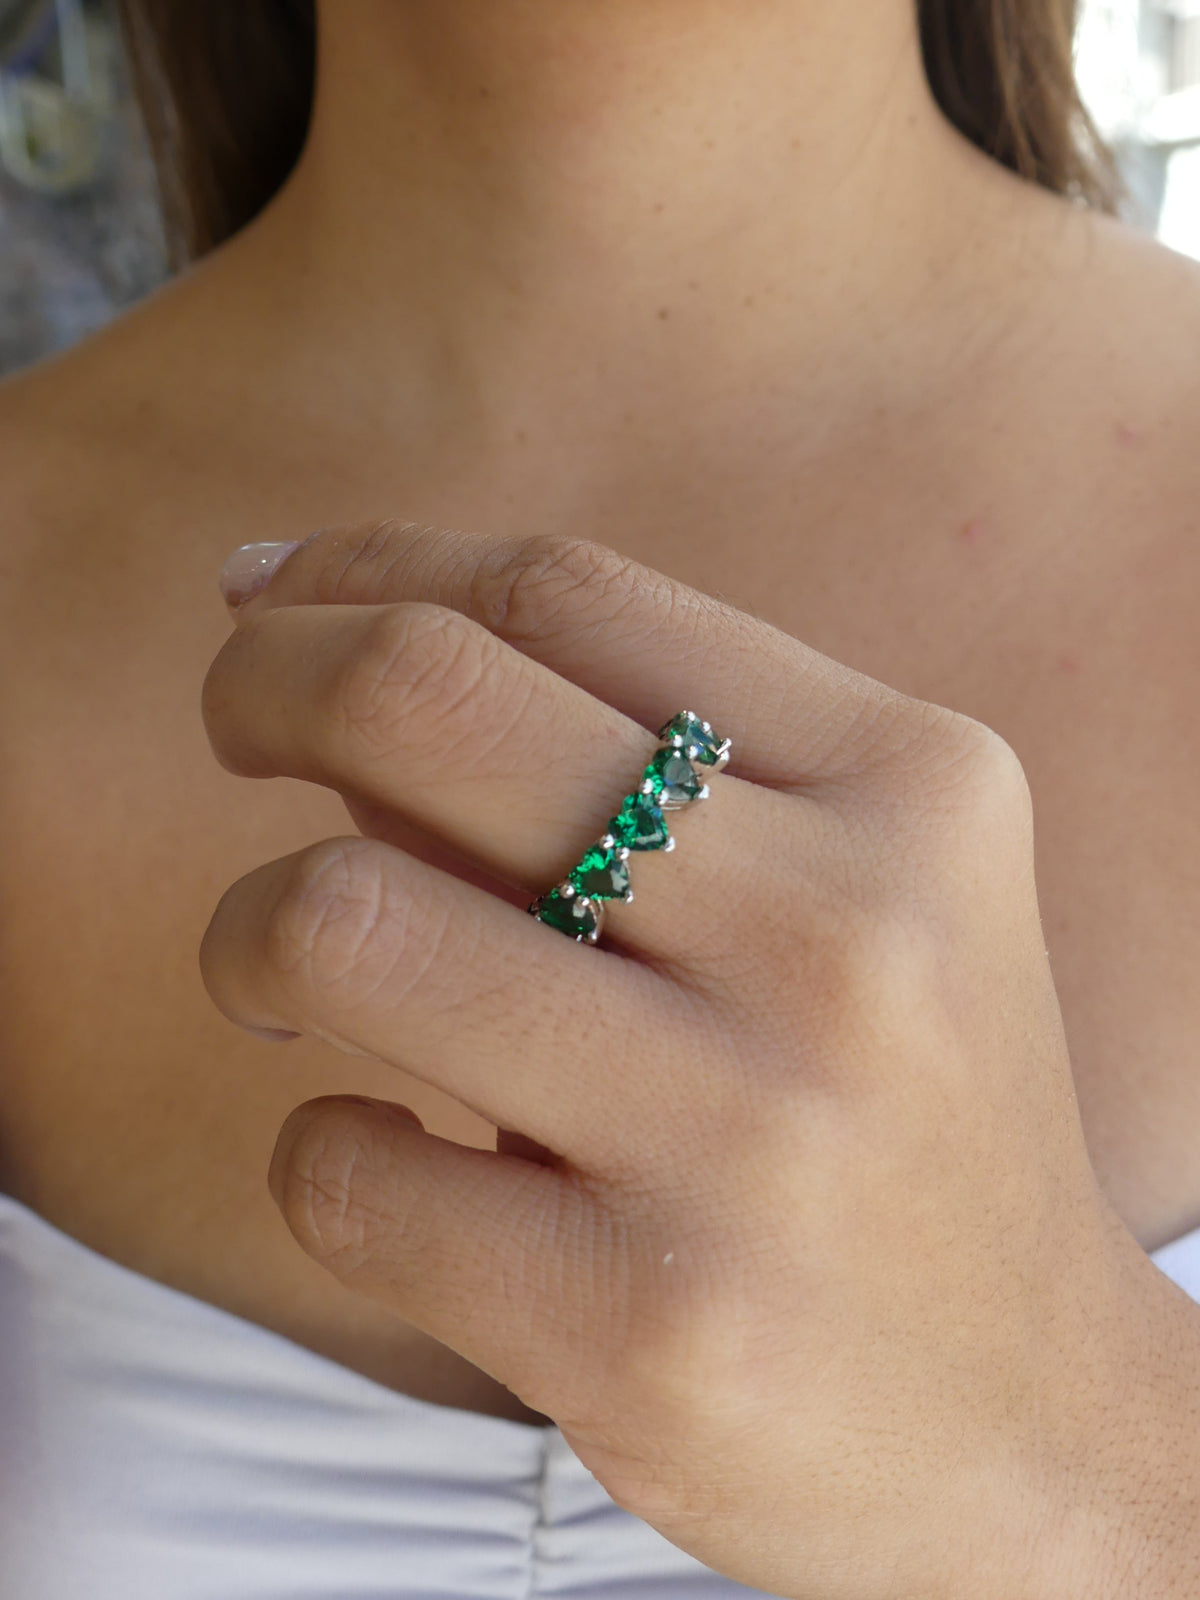 Heart ring AND emerald green diamond-ring band sterling silver  .925 waterproof statement heart rings - eternity statement rings with yellow diamonds canary white gold  designer inspired. Gift ideas. Green and silver rings. things to do in Miami, famous jewelry store trending on instagram and tiktok, influencer style, Miami, brickell, Green and silver jewelry. Kesley Boutique Miami